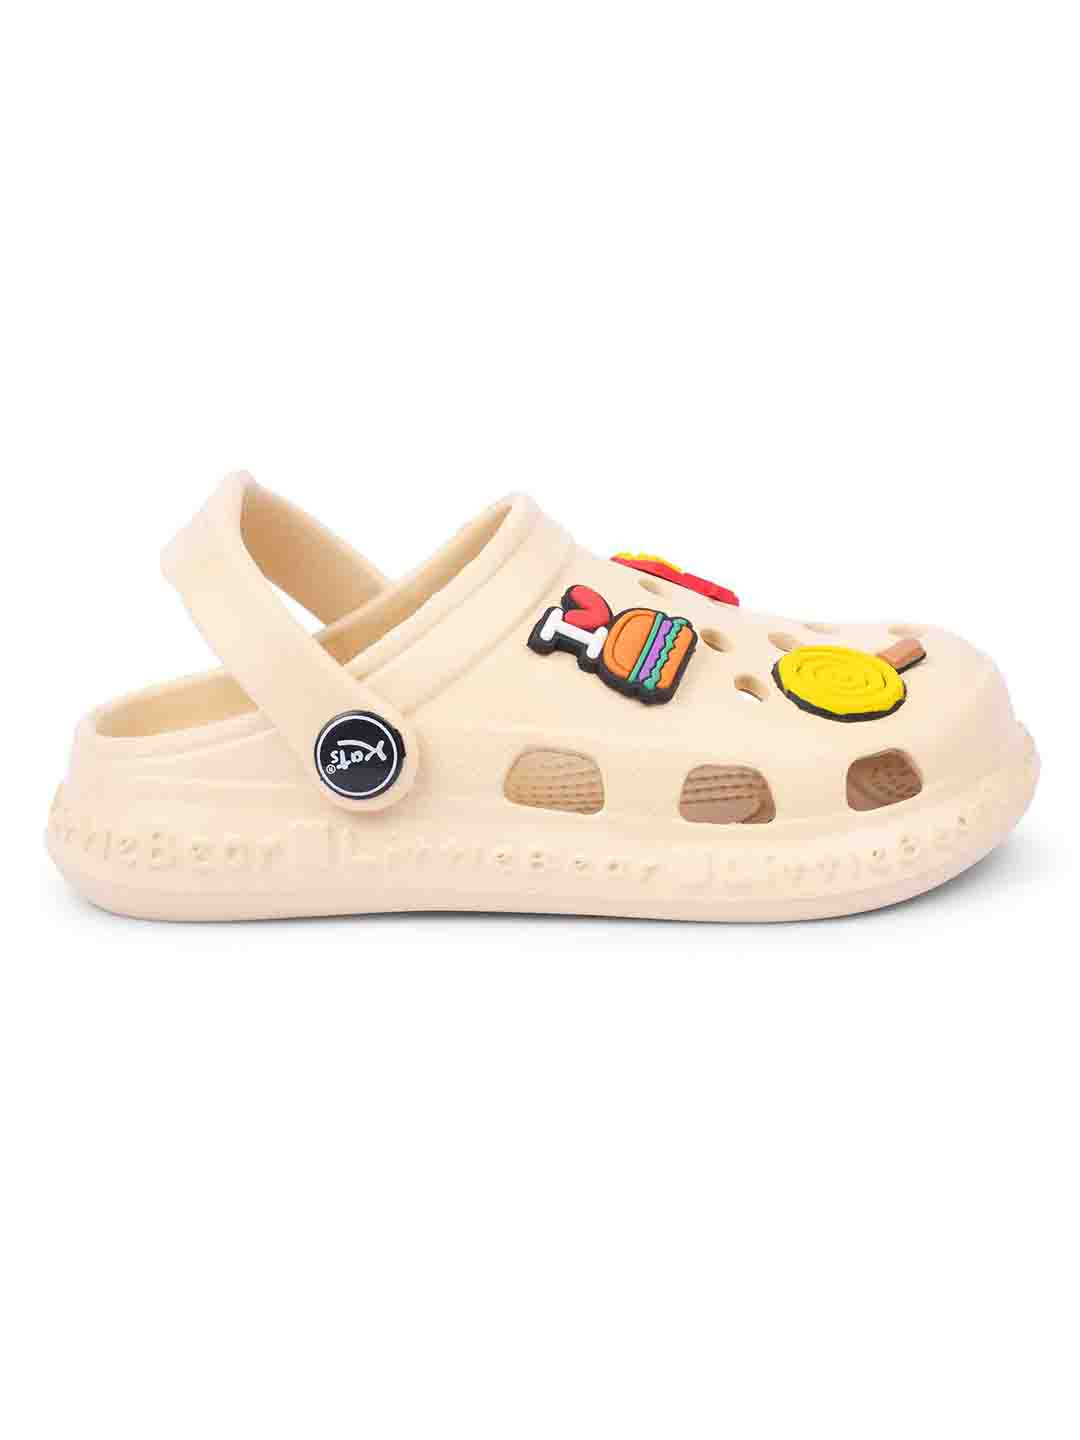 502-Slingback Clog for Boys & Girls | Indoor & Outdoor Clogs for Kids with Cartoon Charm Beige